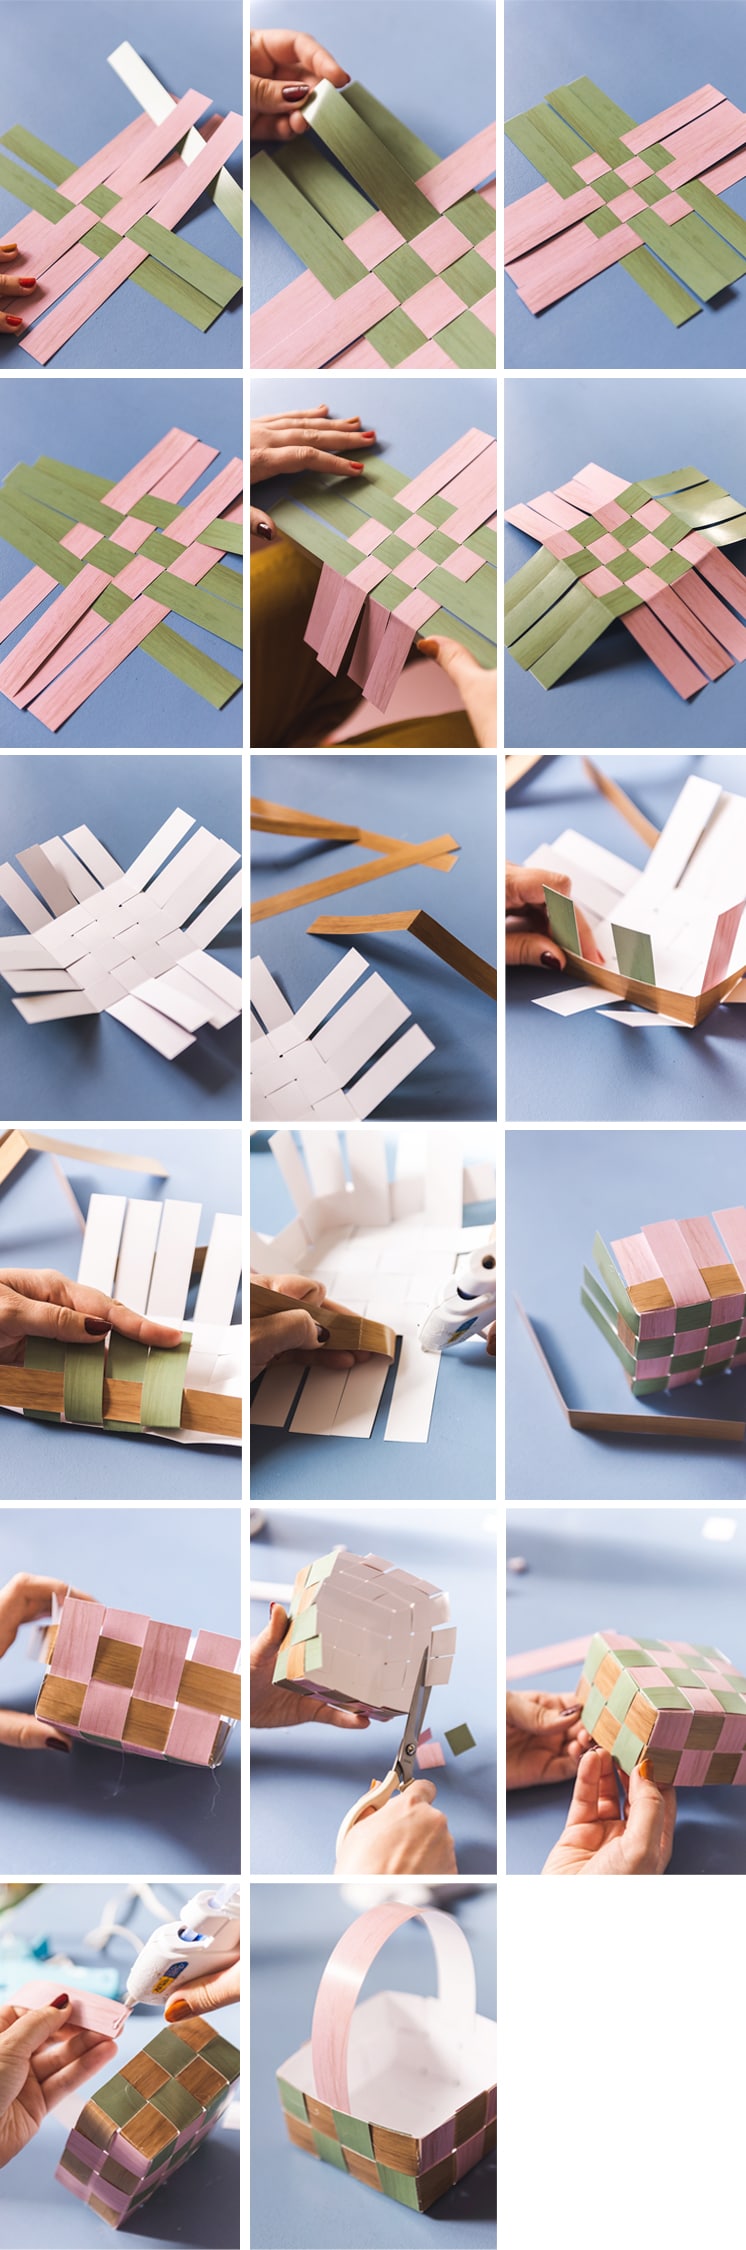 Step-by-step process photos of paper easter basket construction